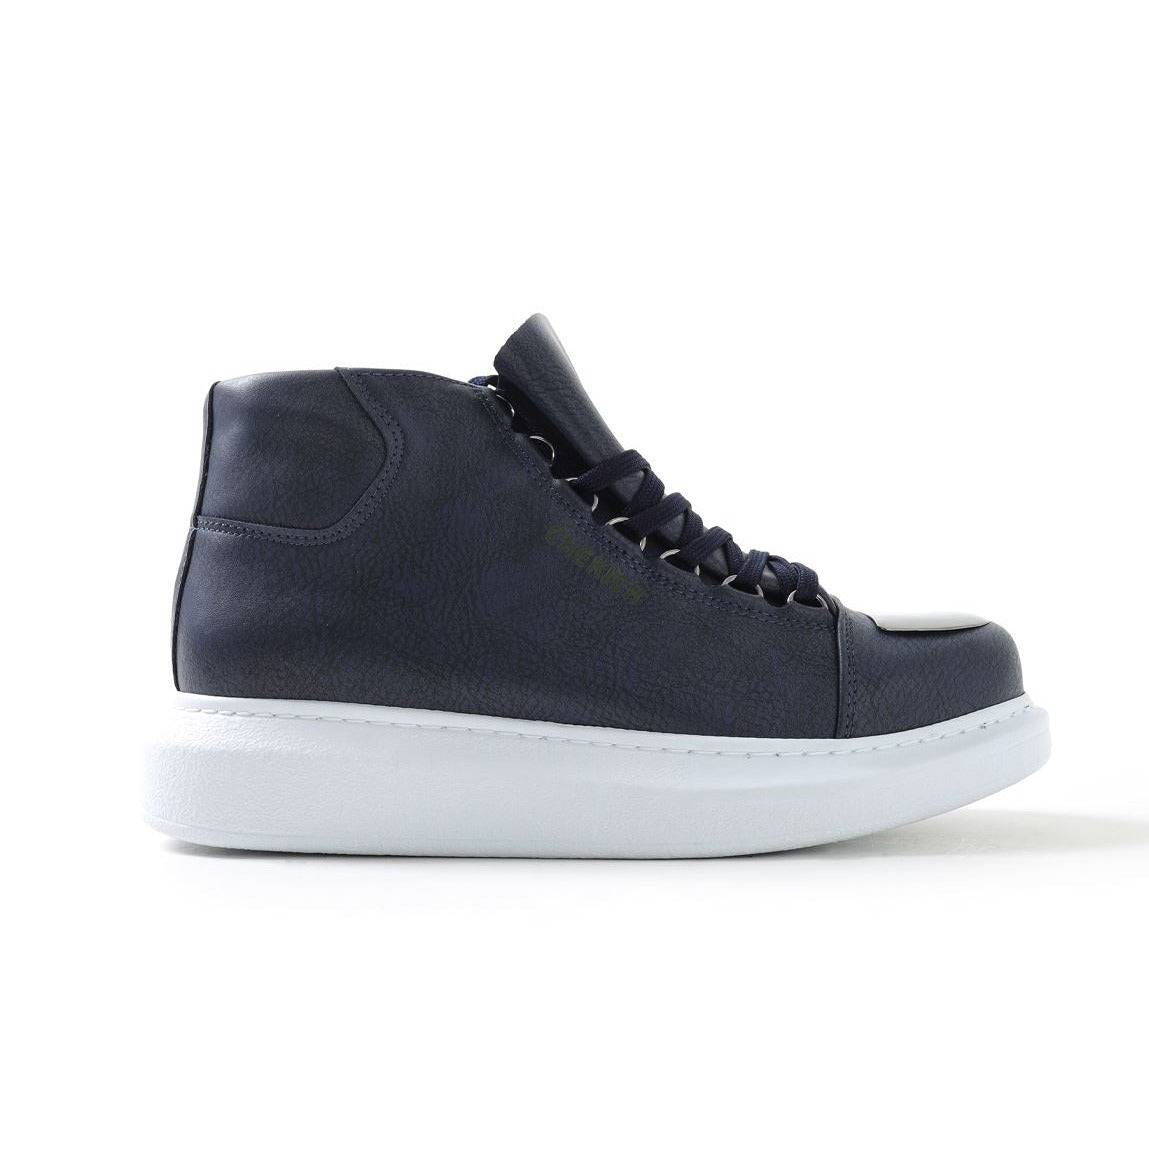 High Top Platform Sneakers for Men by Apollo | Kelly X in Nautical Nuance